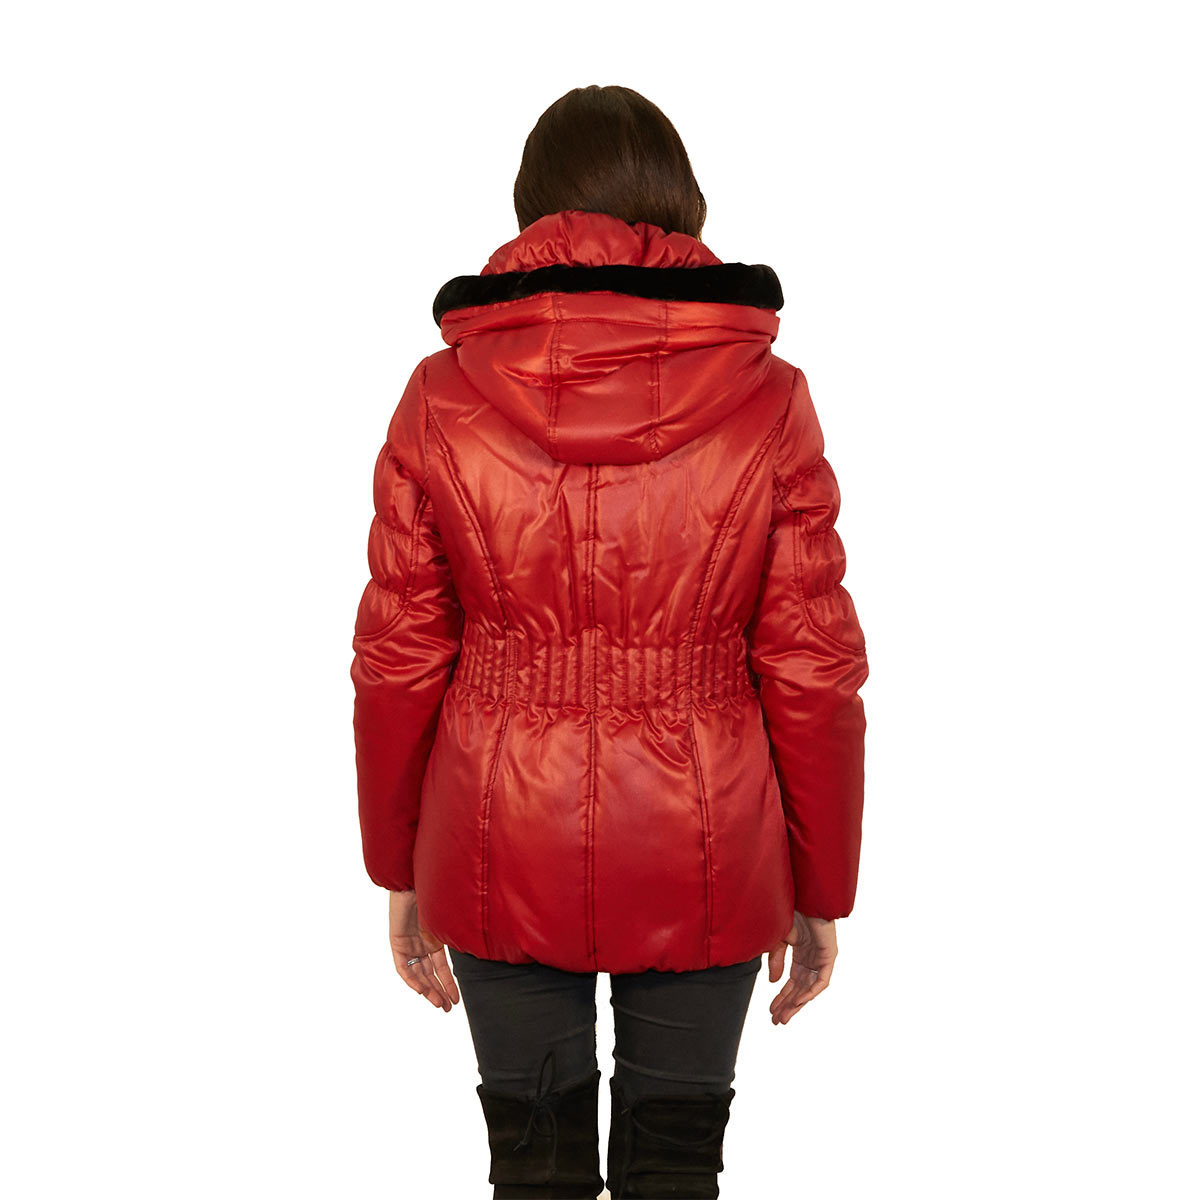 David Barry Women's Padded Jacket Available in Red and 6 Sizes